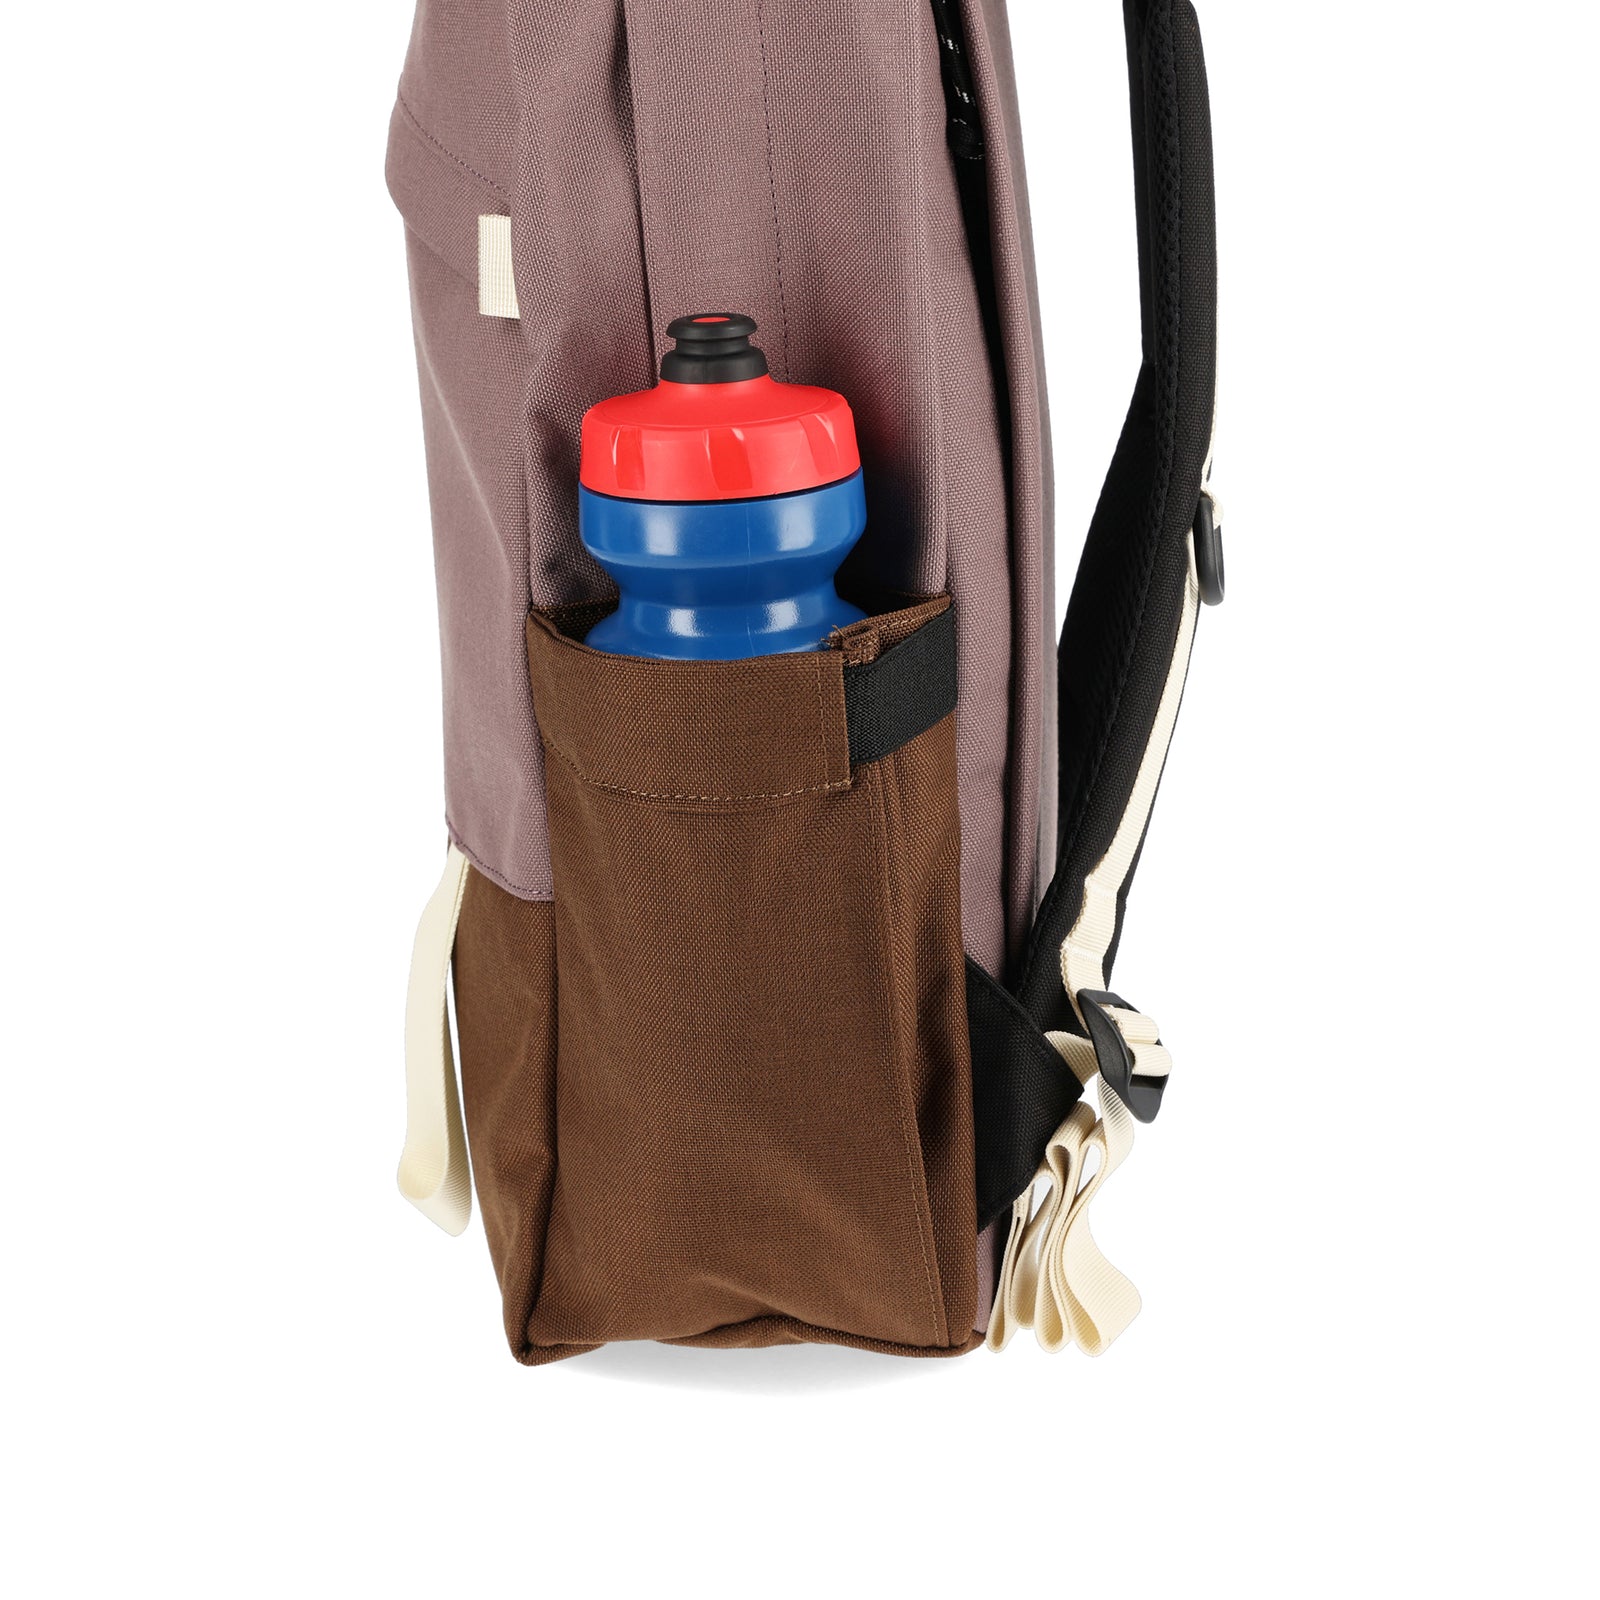 General shot of side expandable water bottle pockets on Topo Designs Daypack Classic 100% recycled nylon laptop backpack for work or school in "Peppercorn / Cocoa" purple brown